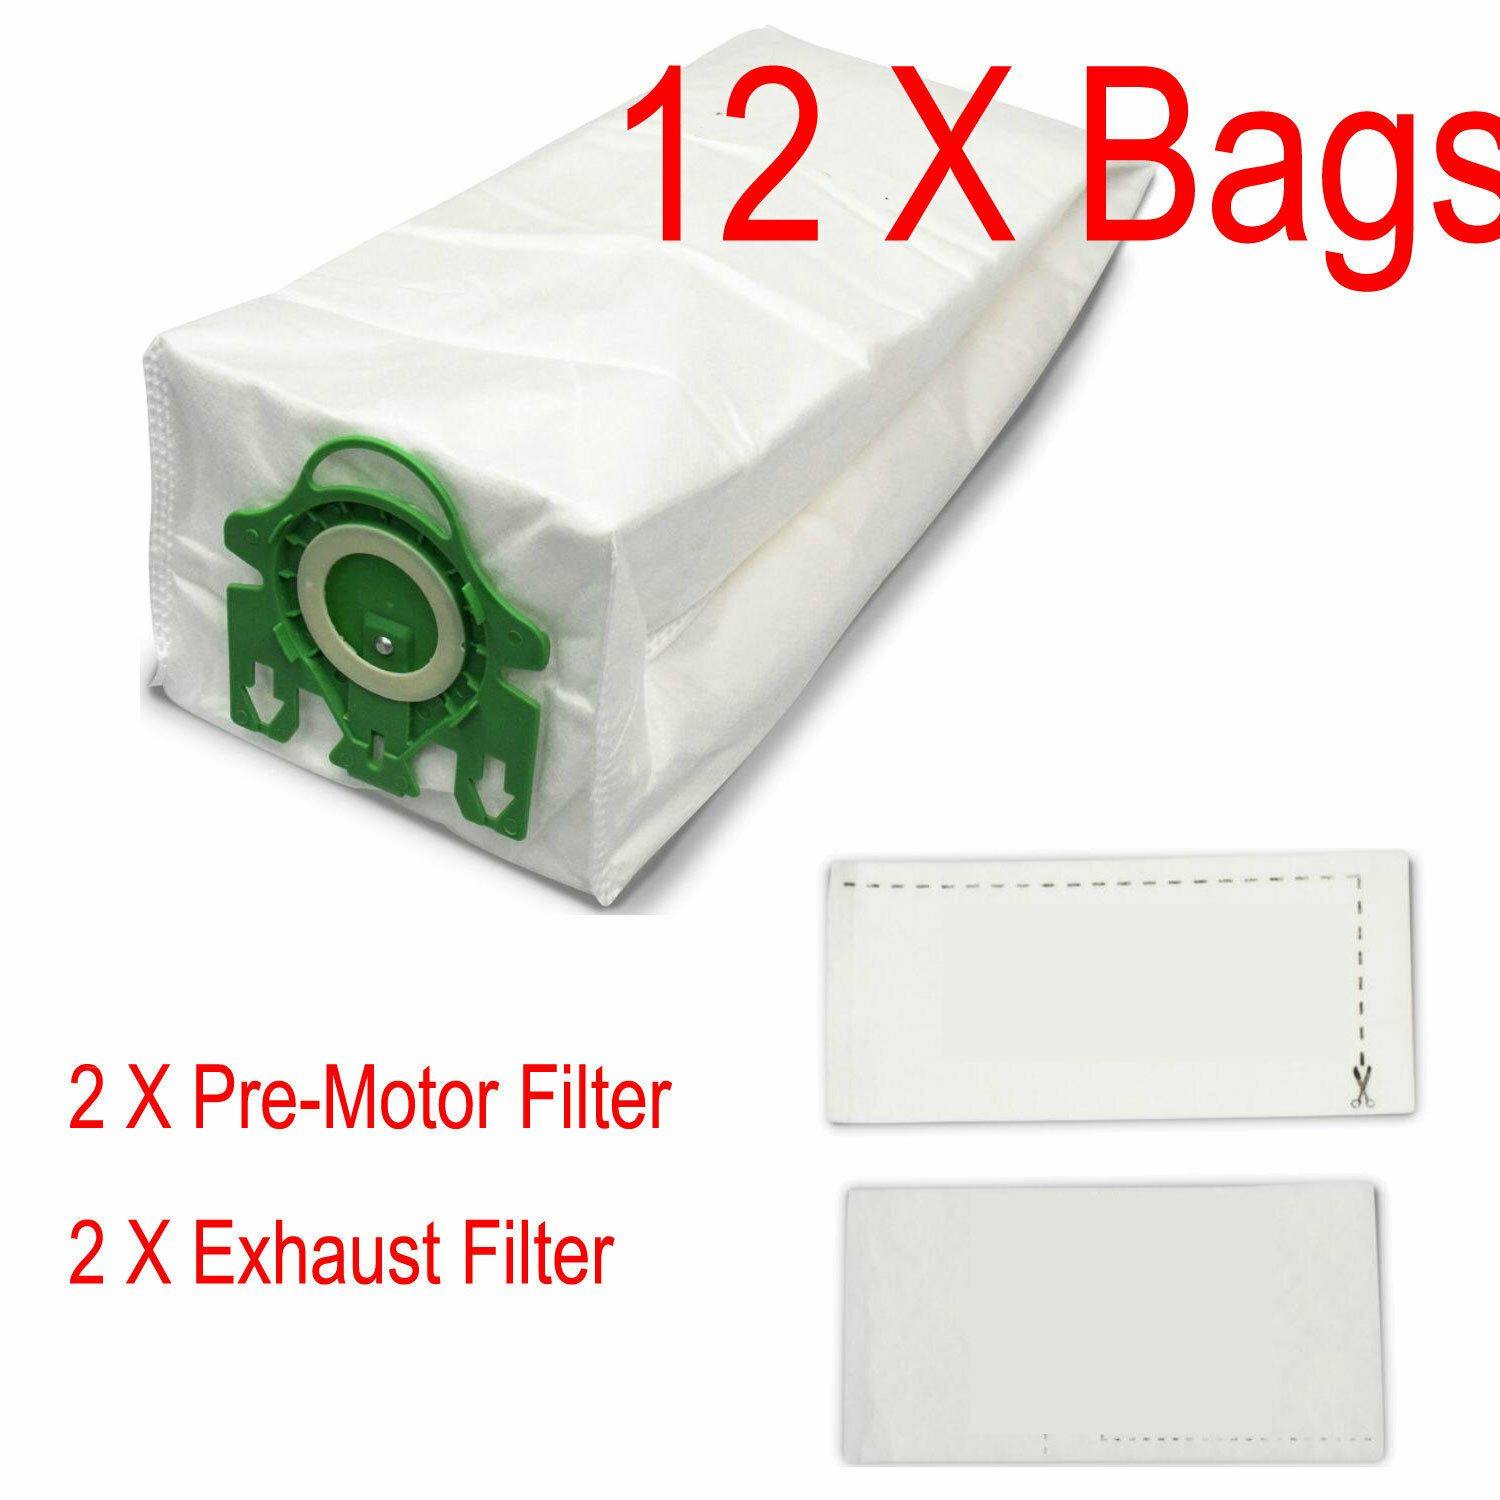 12 Synthetic Bags & 4 Filters for Miele FreshAir S7280 HomeCare S7580 Cat & Dog Sparesbarn